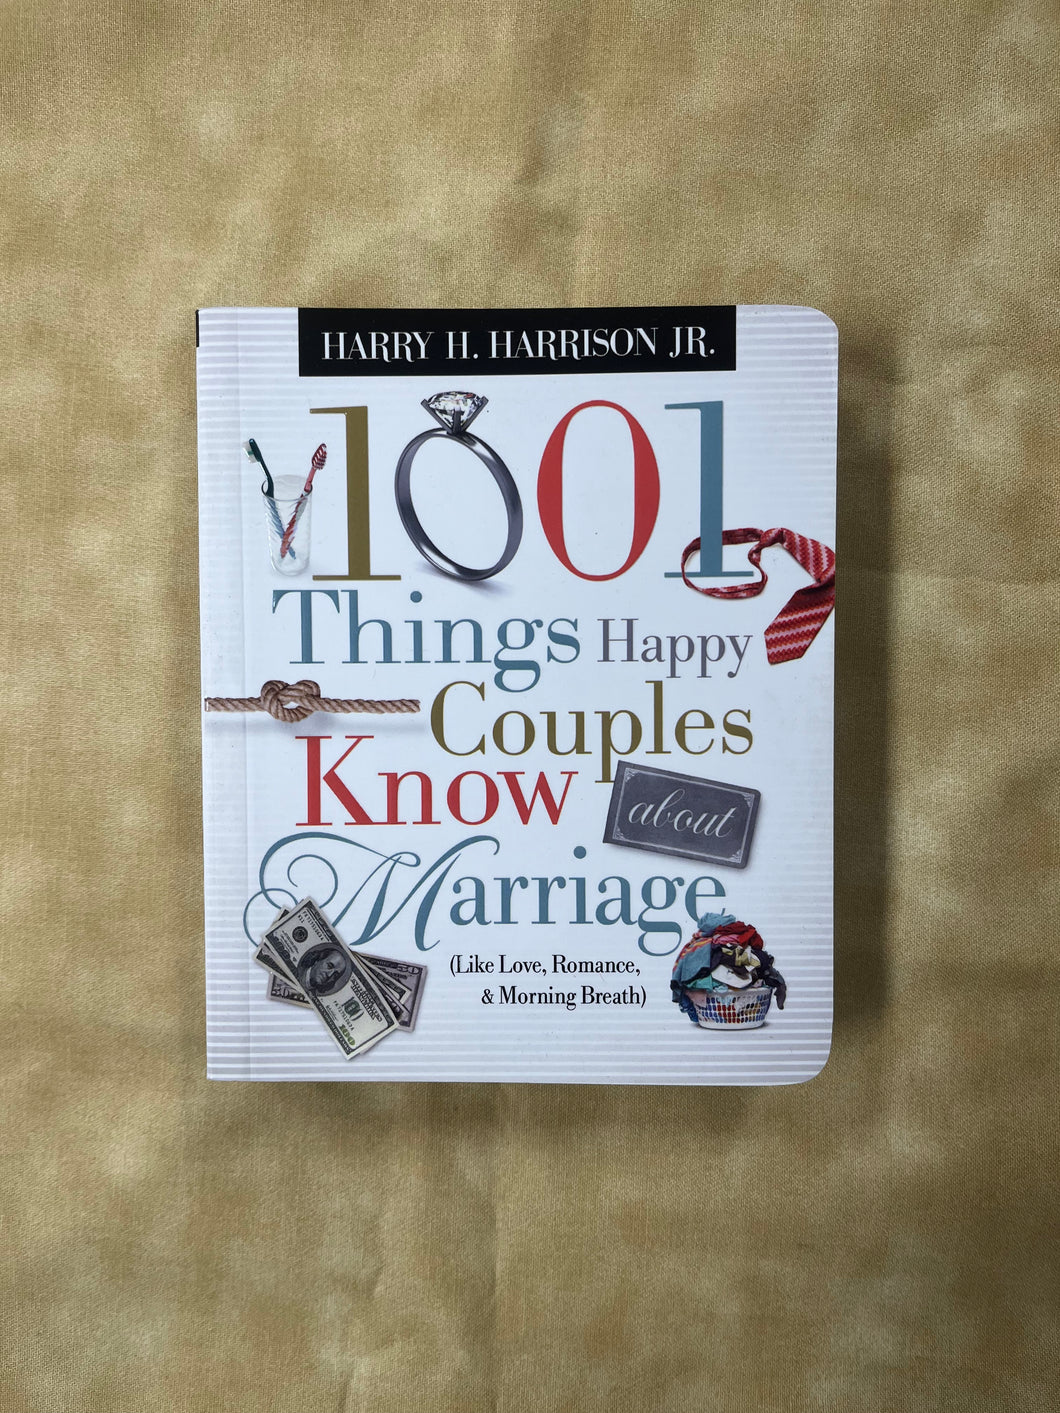 1,001 Things Happy Couples know about Marriage